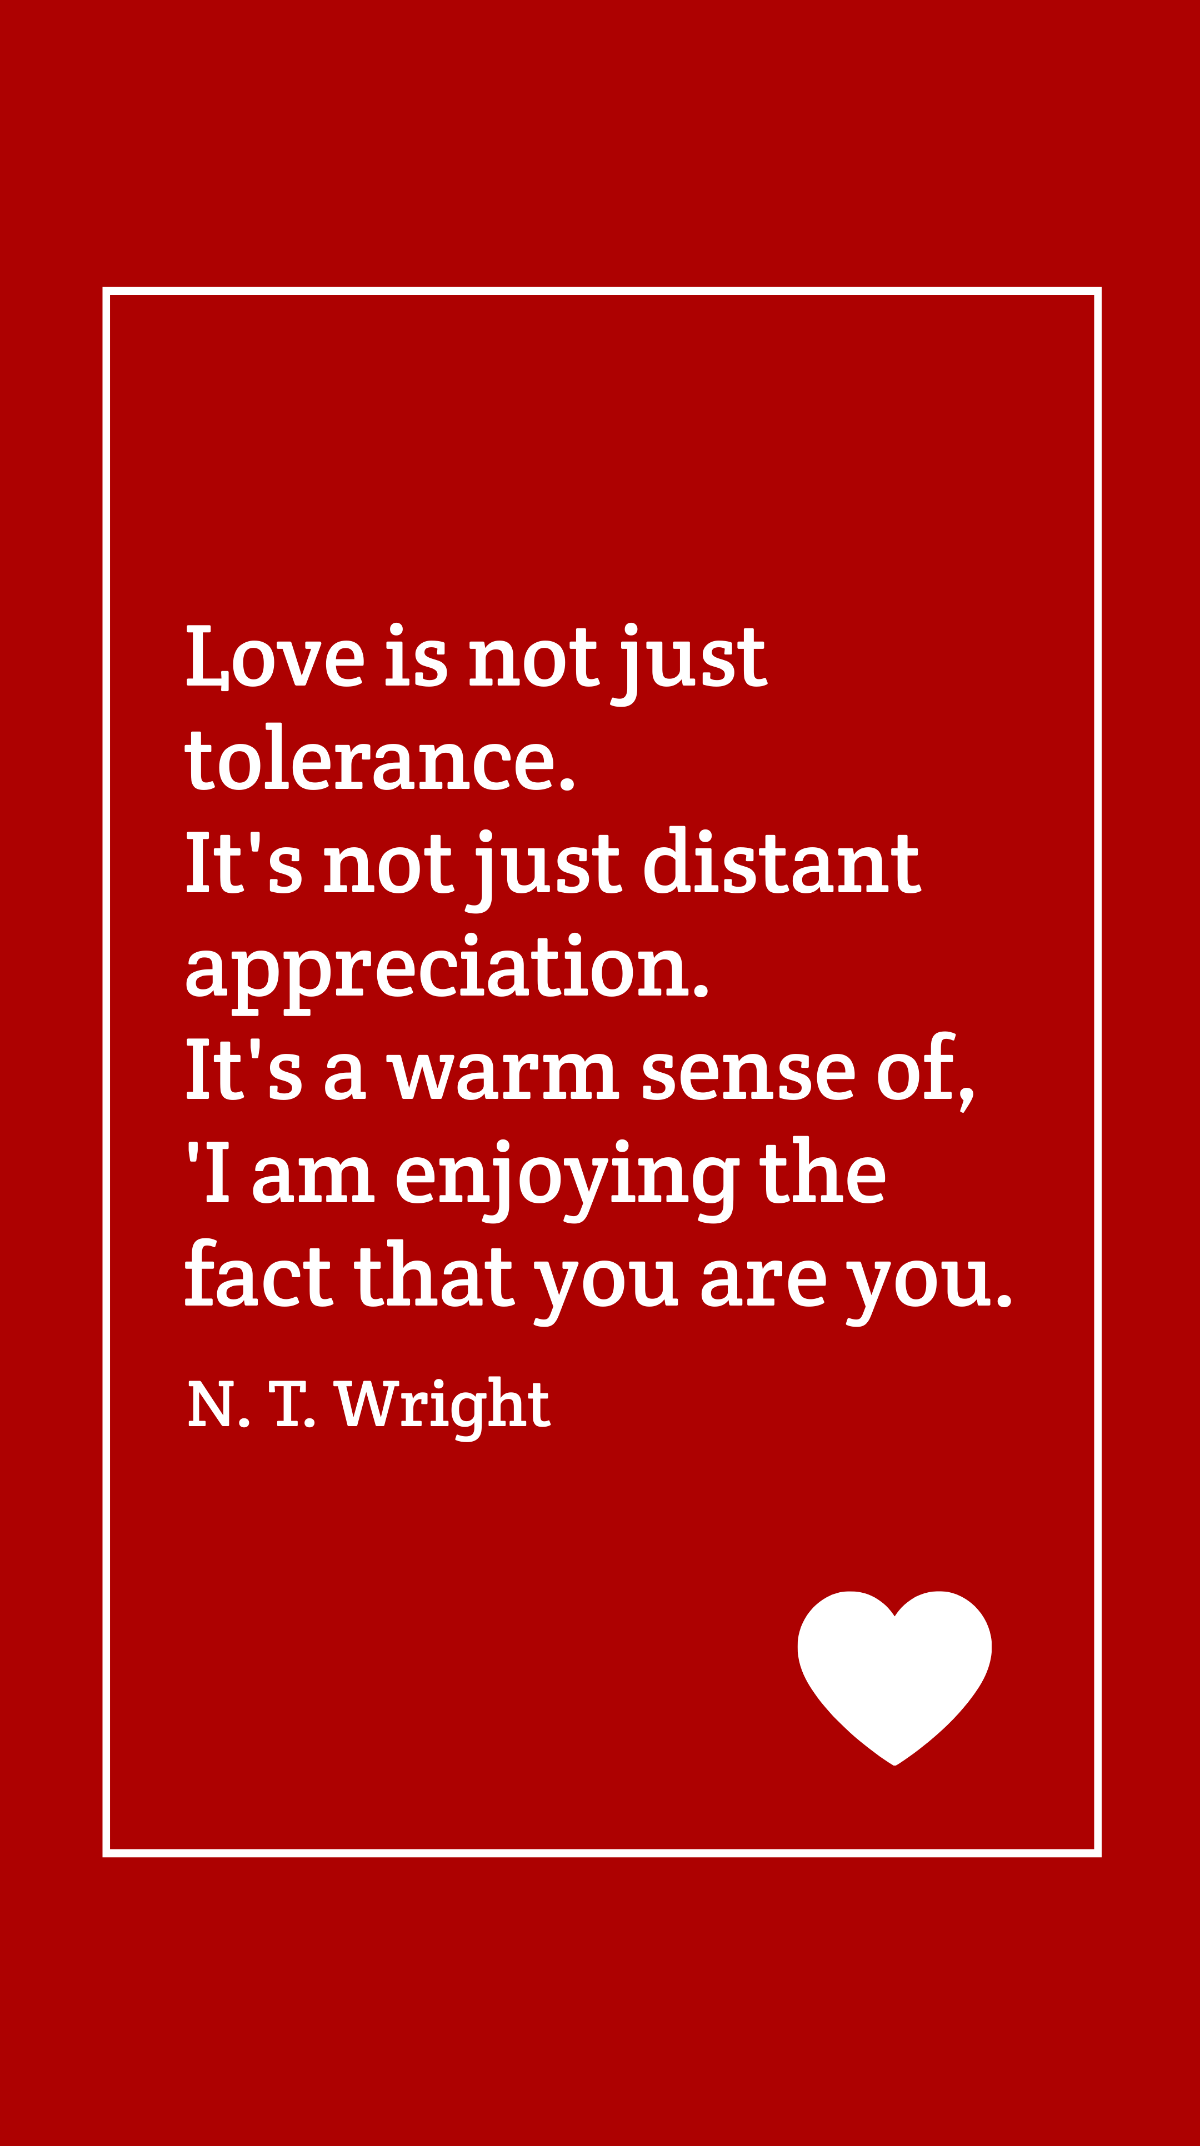 N. T. Wright - Love is not just tolerance. It's not just distant appreciation. It's a warm sense of, 'I am enjoying the fact that you are you. Template